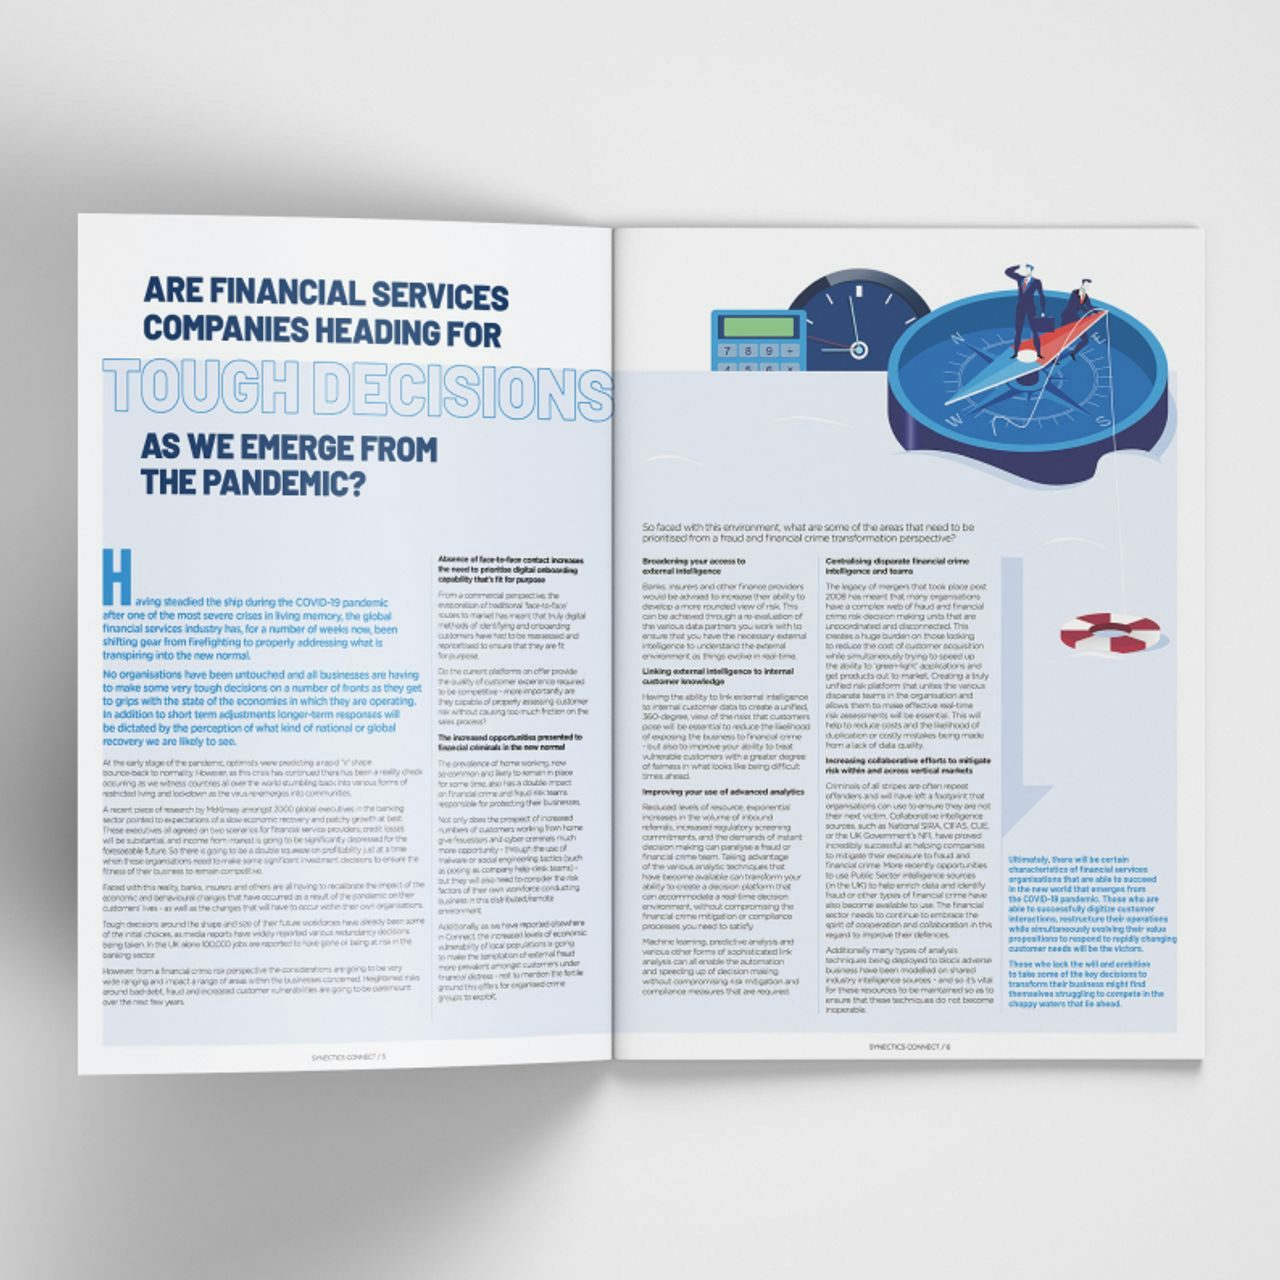 Open spread of a 'CONNECT' article titled 'Are financial services companies heading for tough decisions as we emerge from the pandemic?' The left page contains a large title, while the right page includes a graphic of a compass.